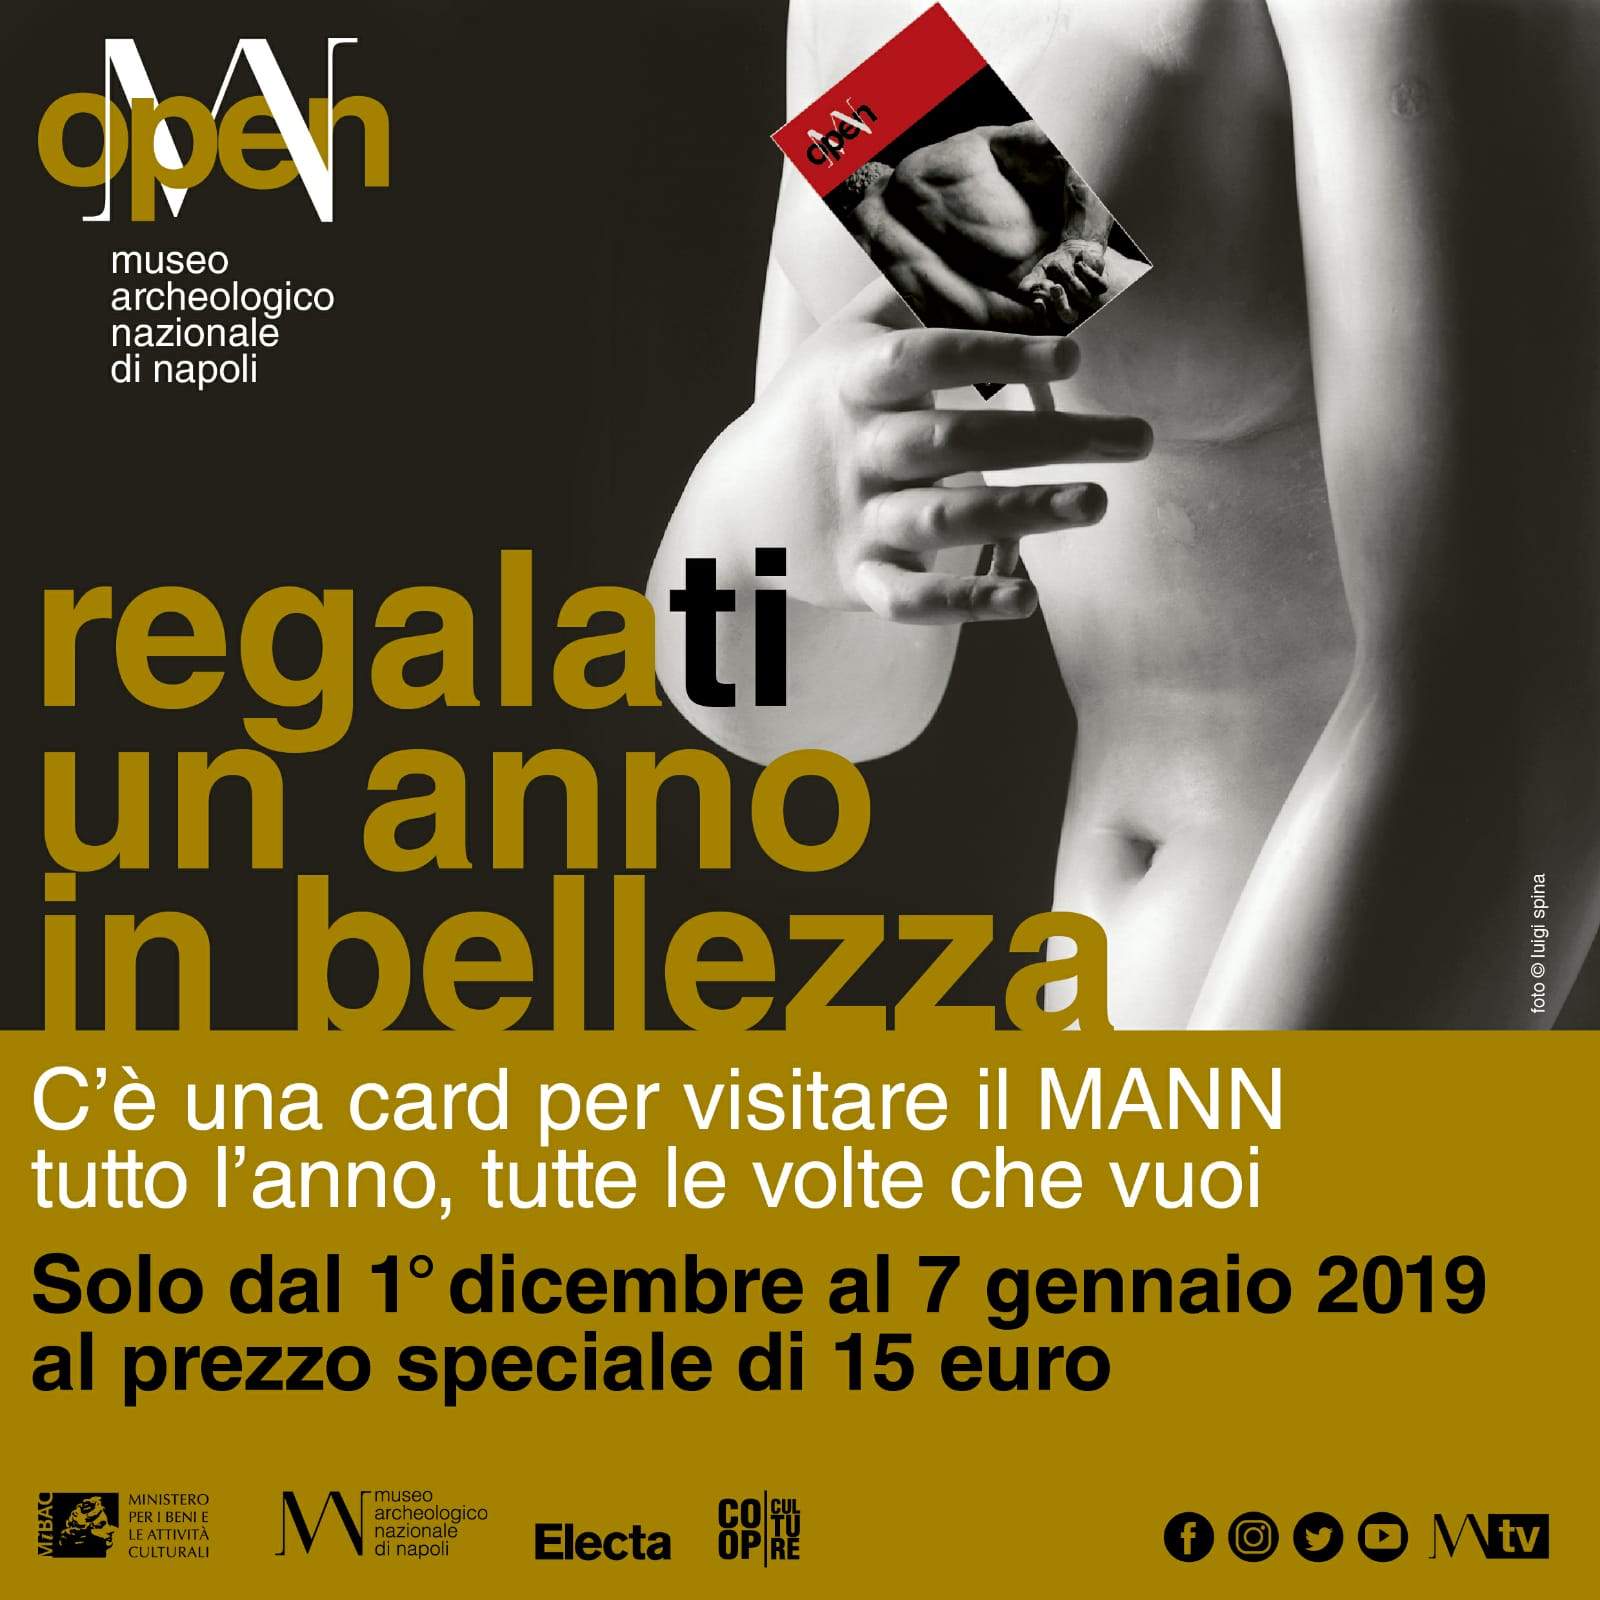 Open MANN: card arrives to visit Naples' National Archaeological Museum year-round